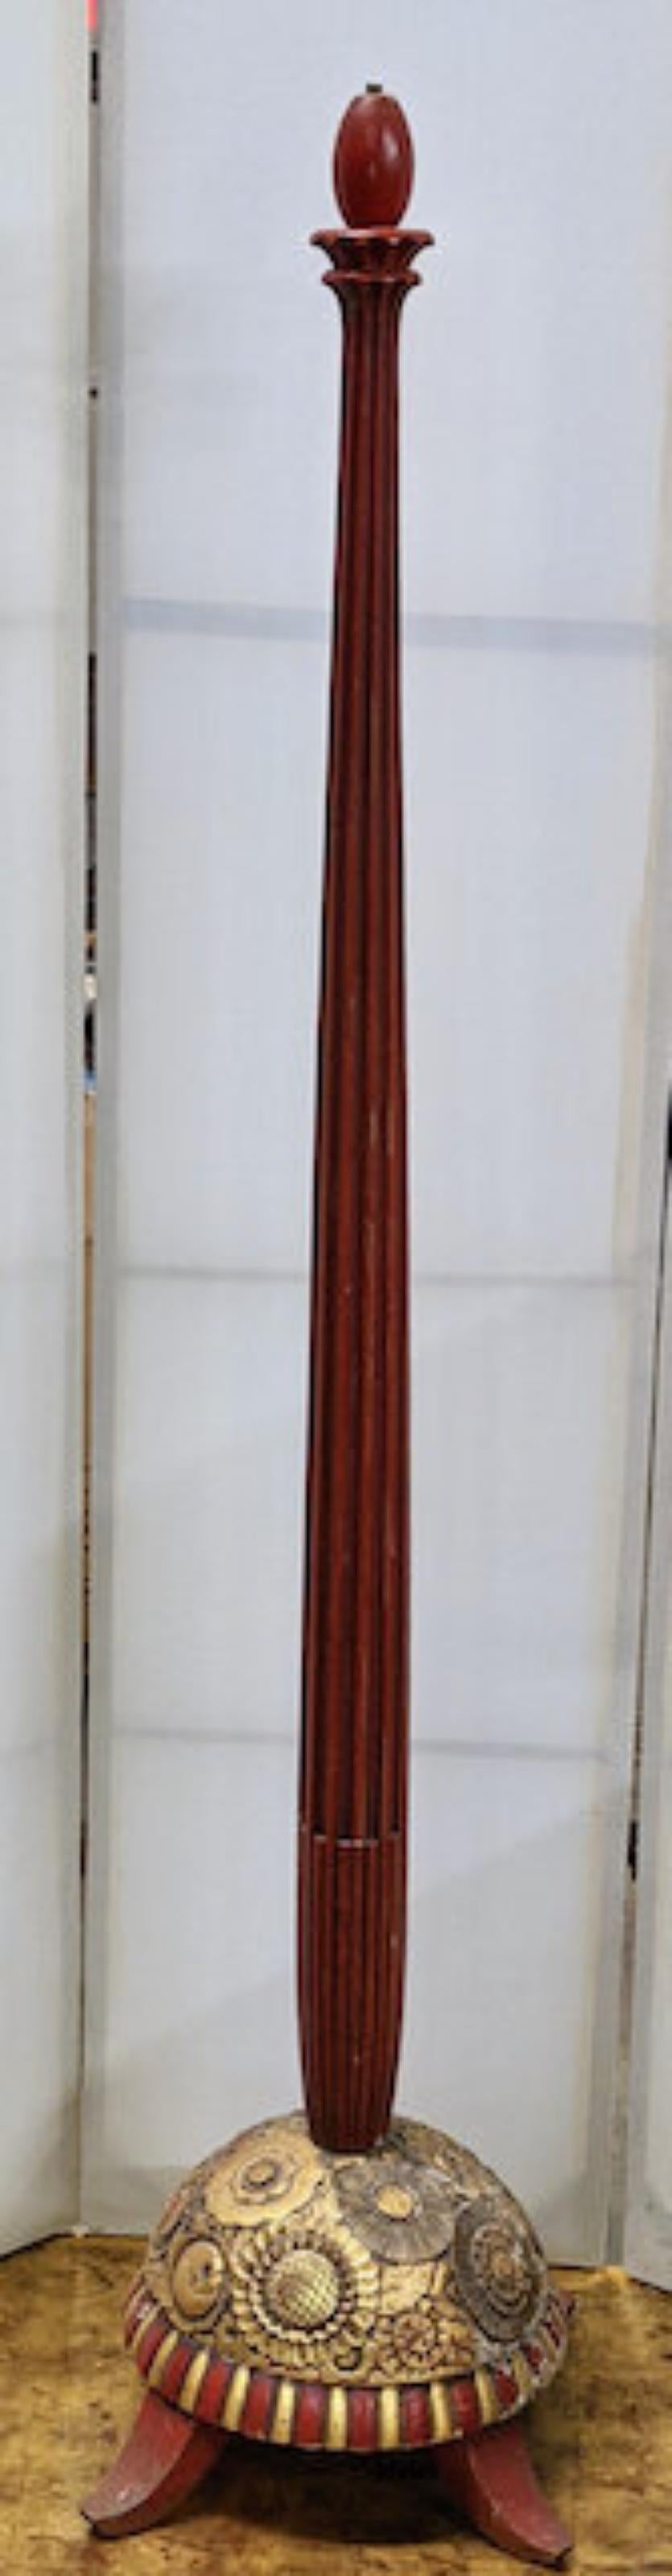 Paul Follot Sculpted Gilt and Red Lacquer Floor Lamp In Good Condition For Sale In Philadelphia, PA